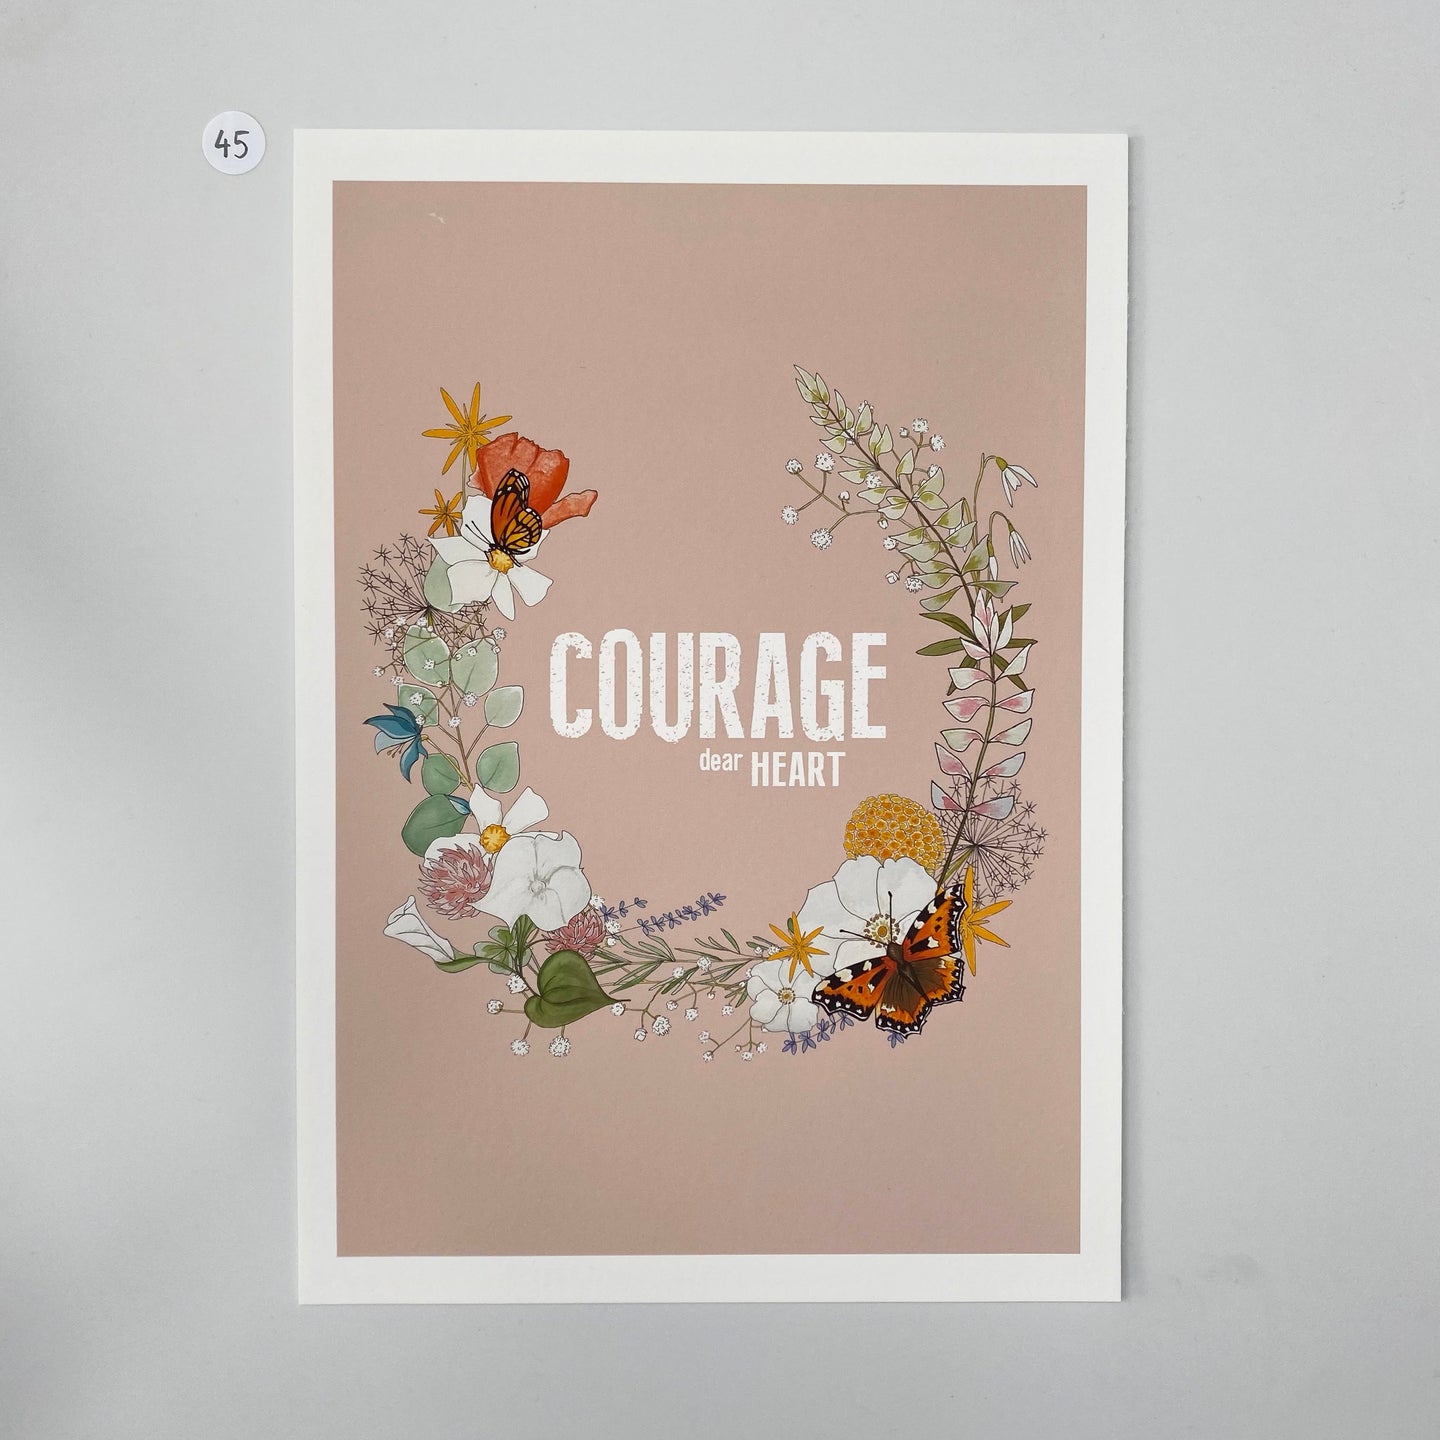 Outlet 45: Courage dear Heart - A4